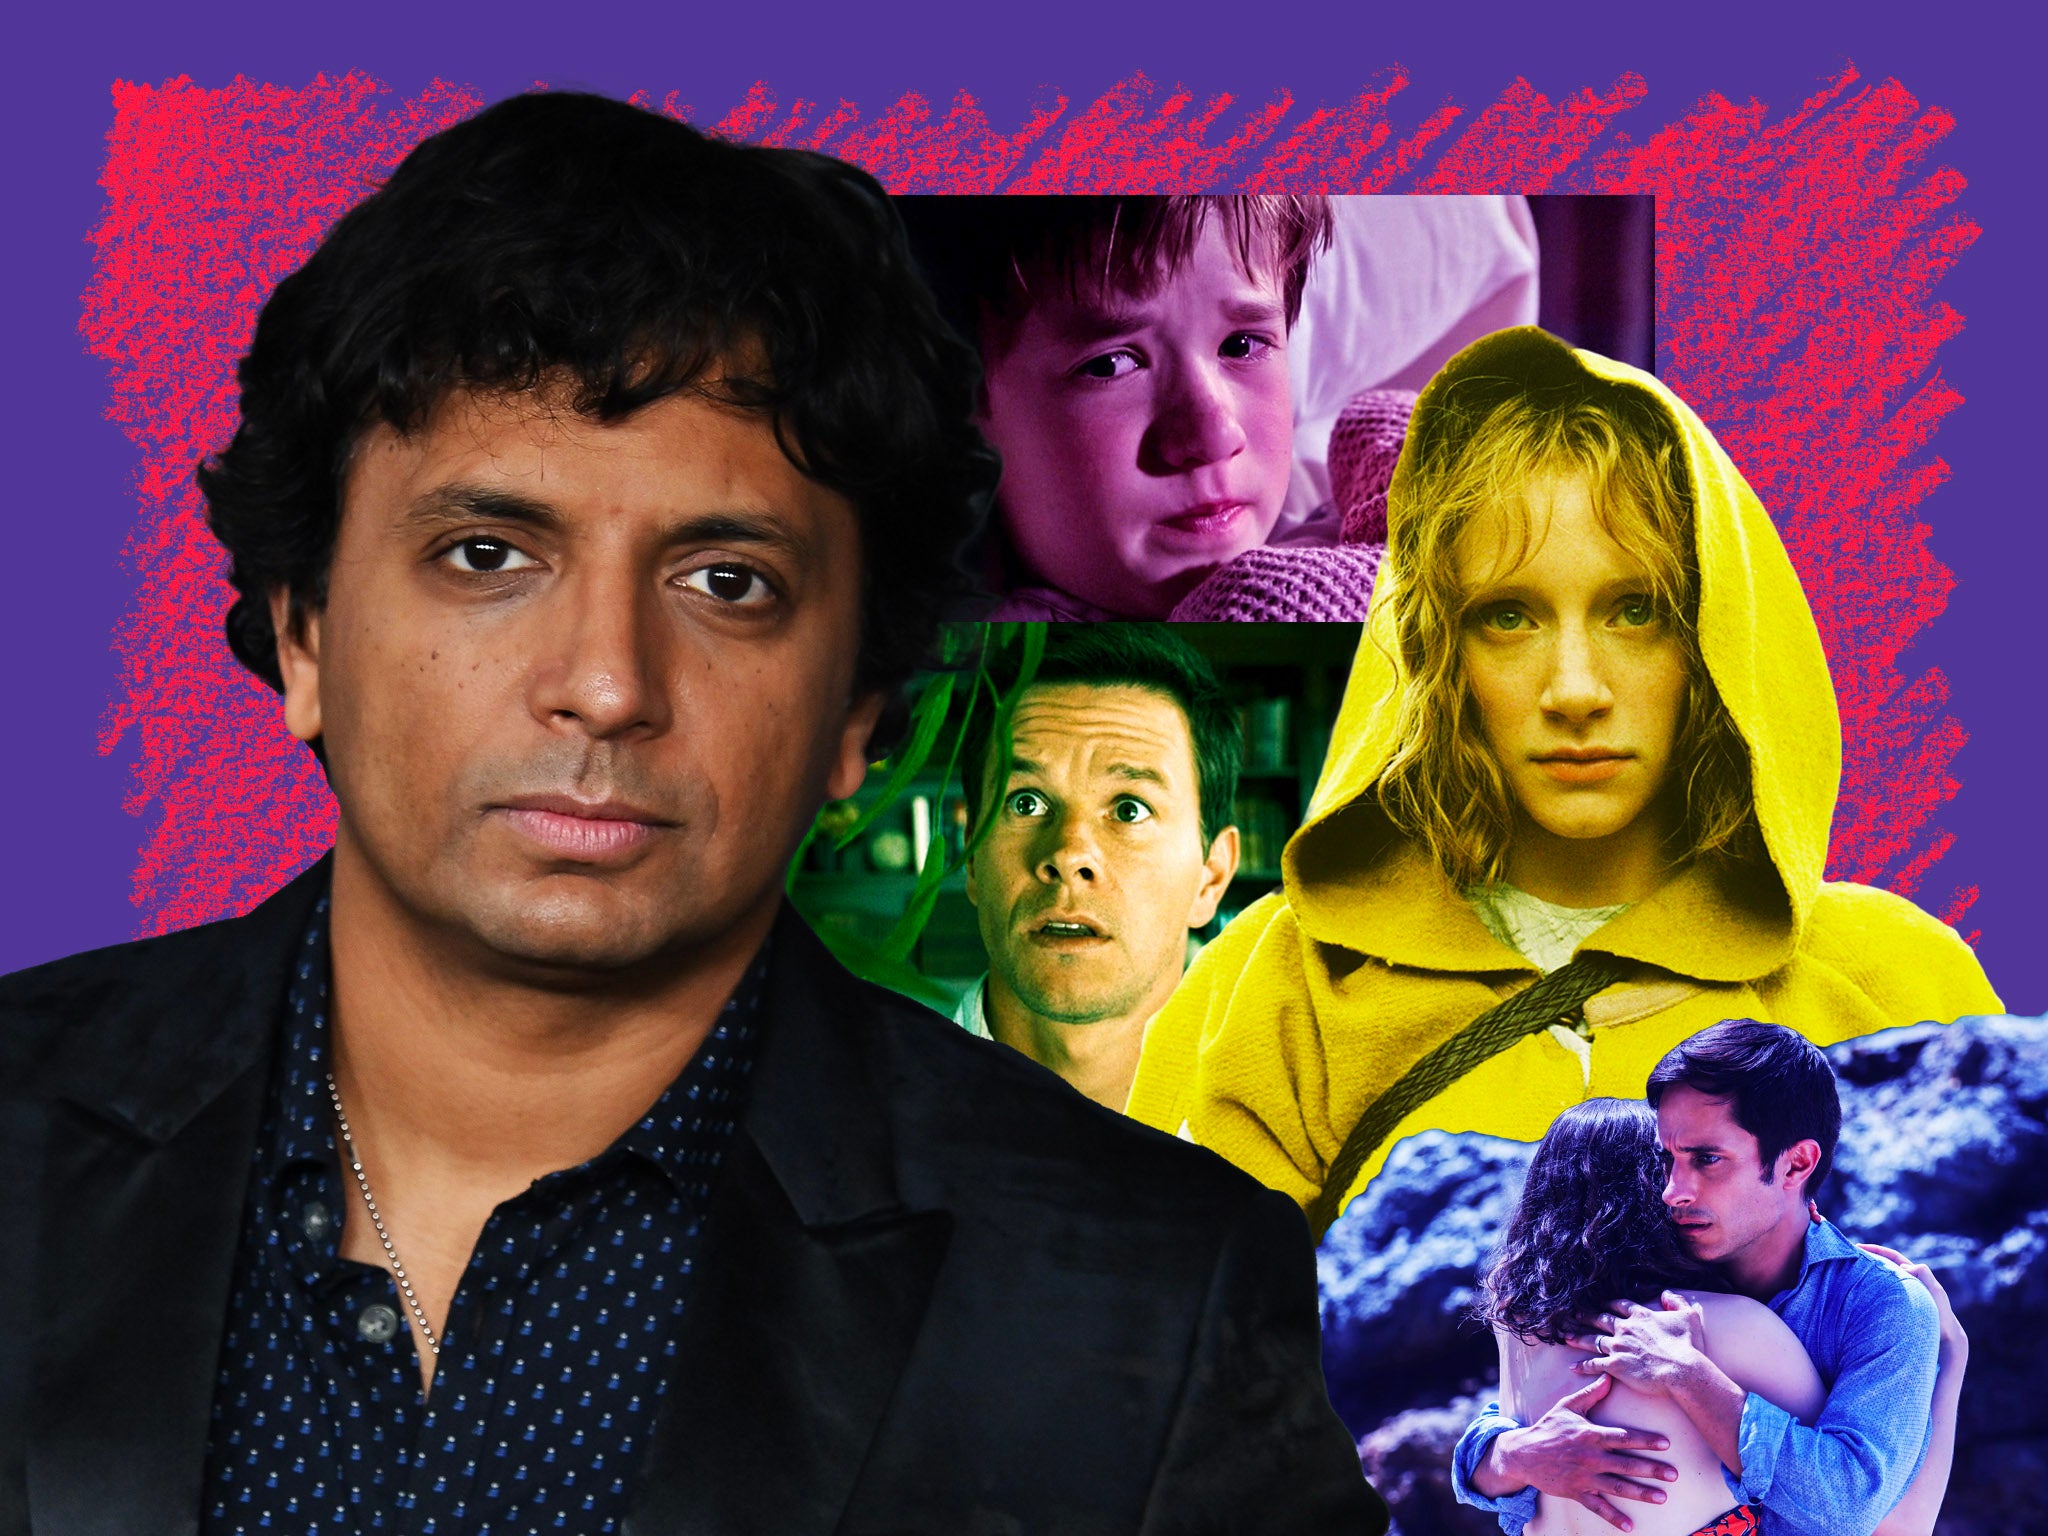 Five movies that ruined M. Night Shyamalan's once promising career